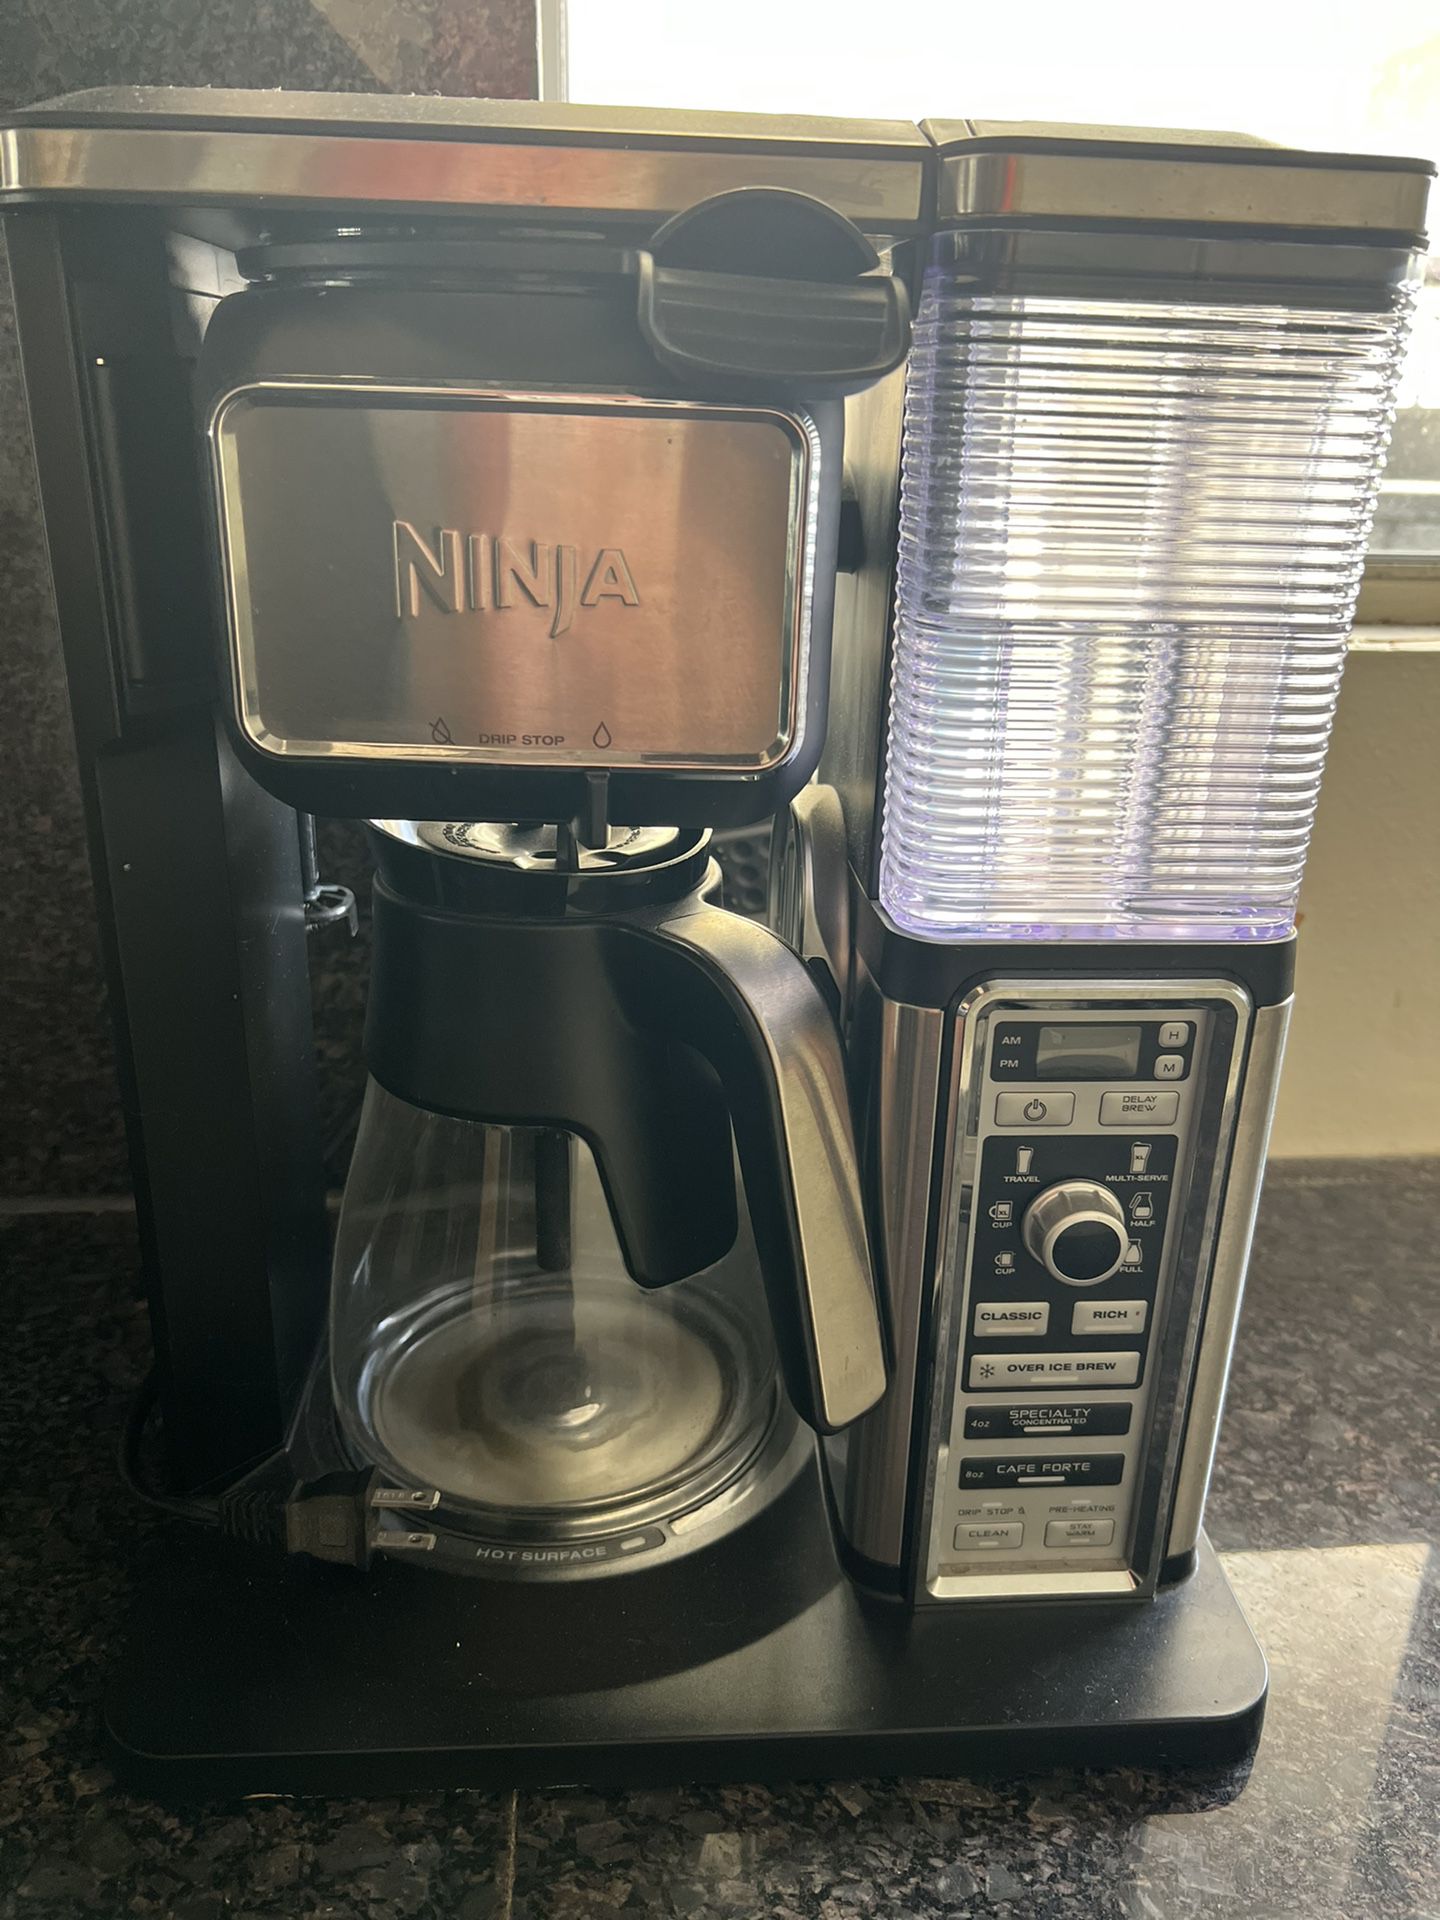 Ninja Coffee Maker And Frother